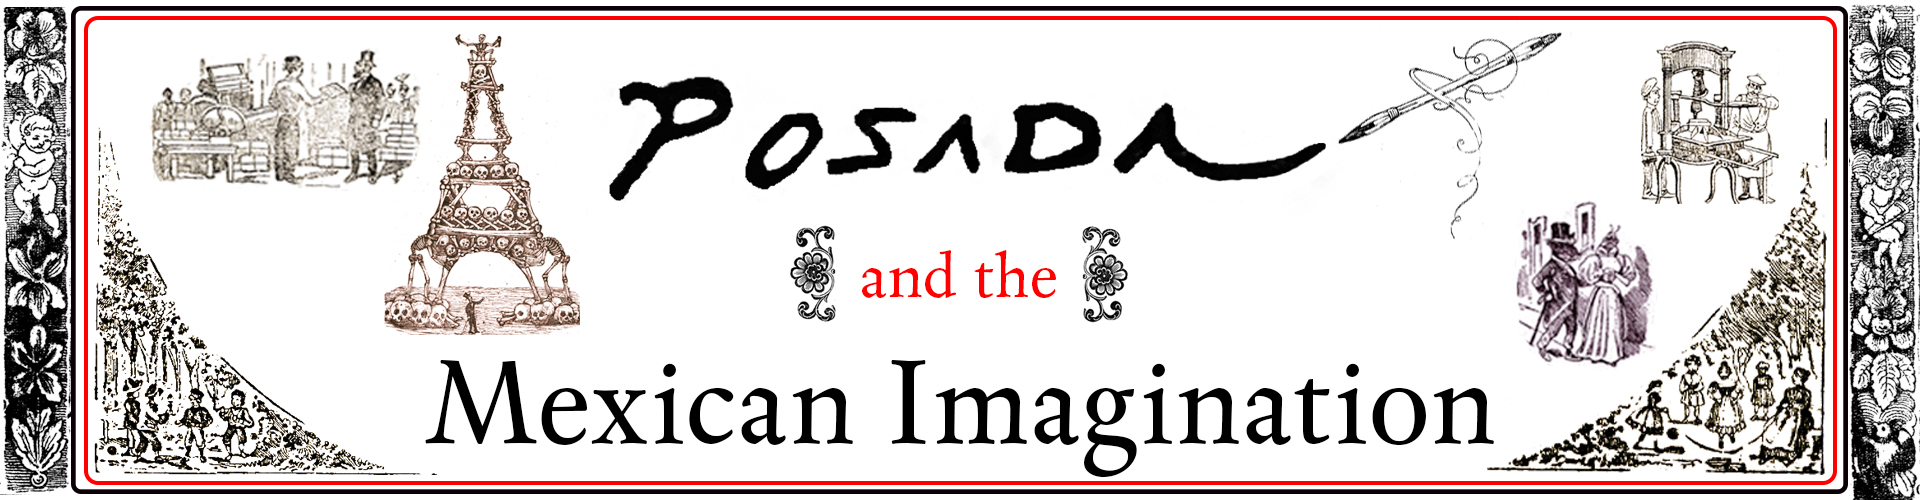 Posada and the Mexican Imagination